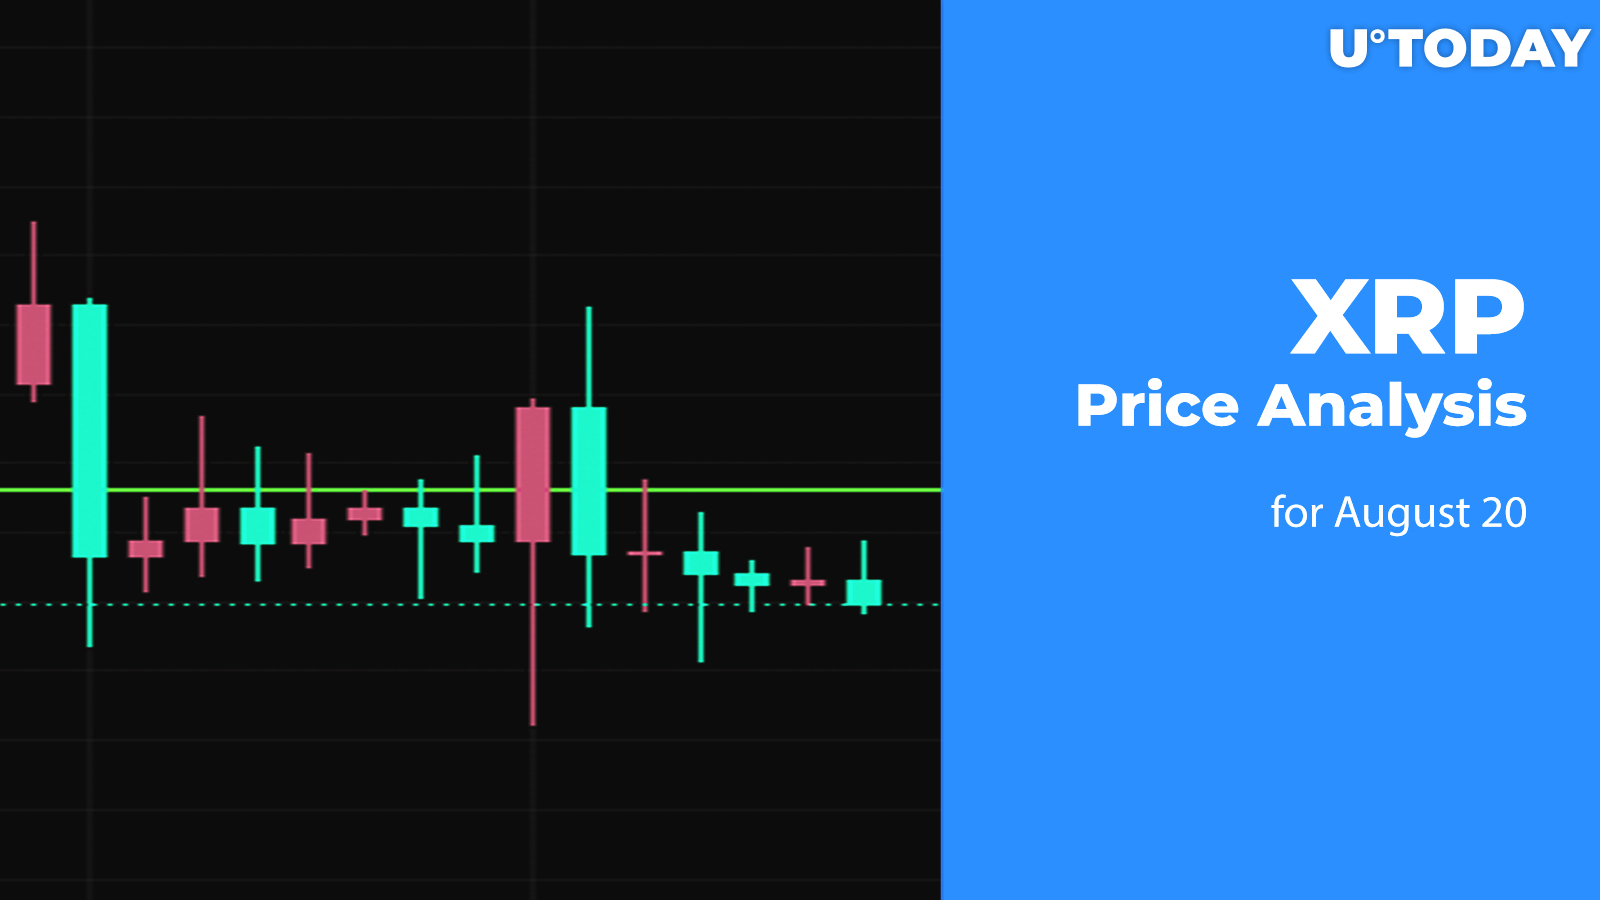 XRP Price Analysis for August 20